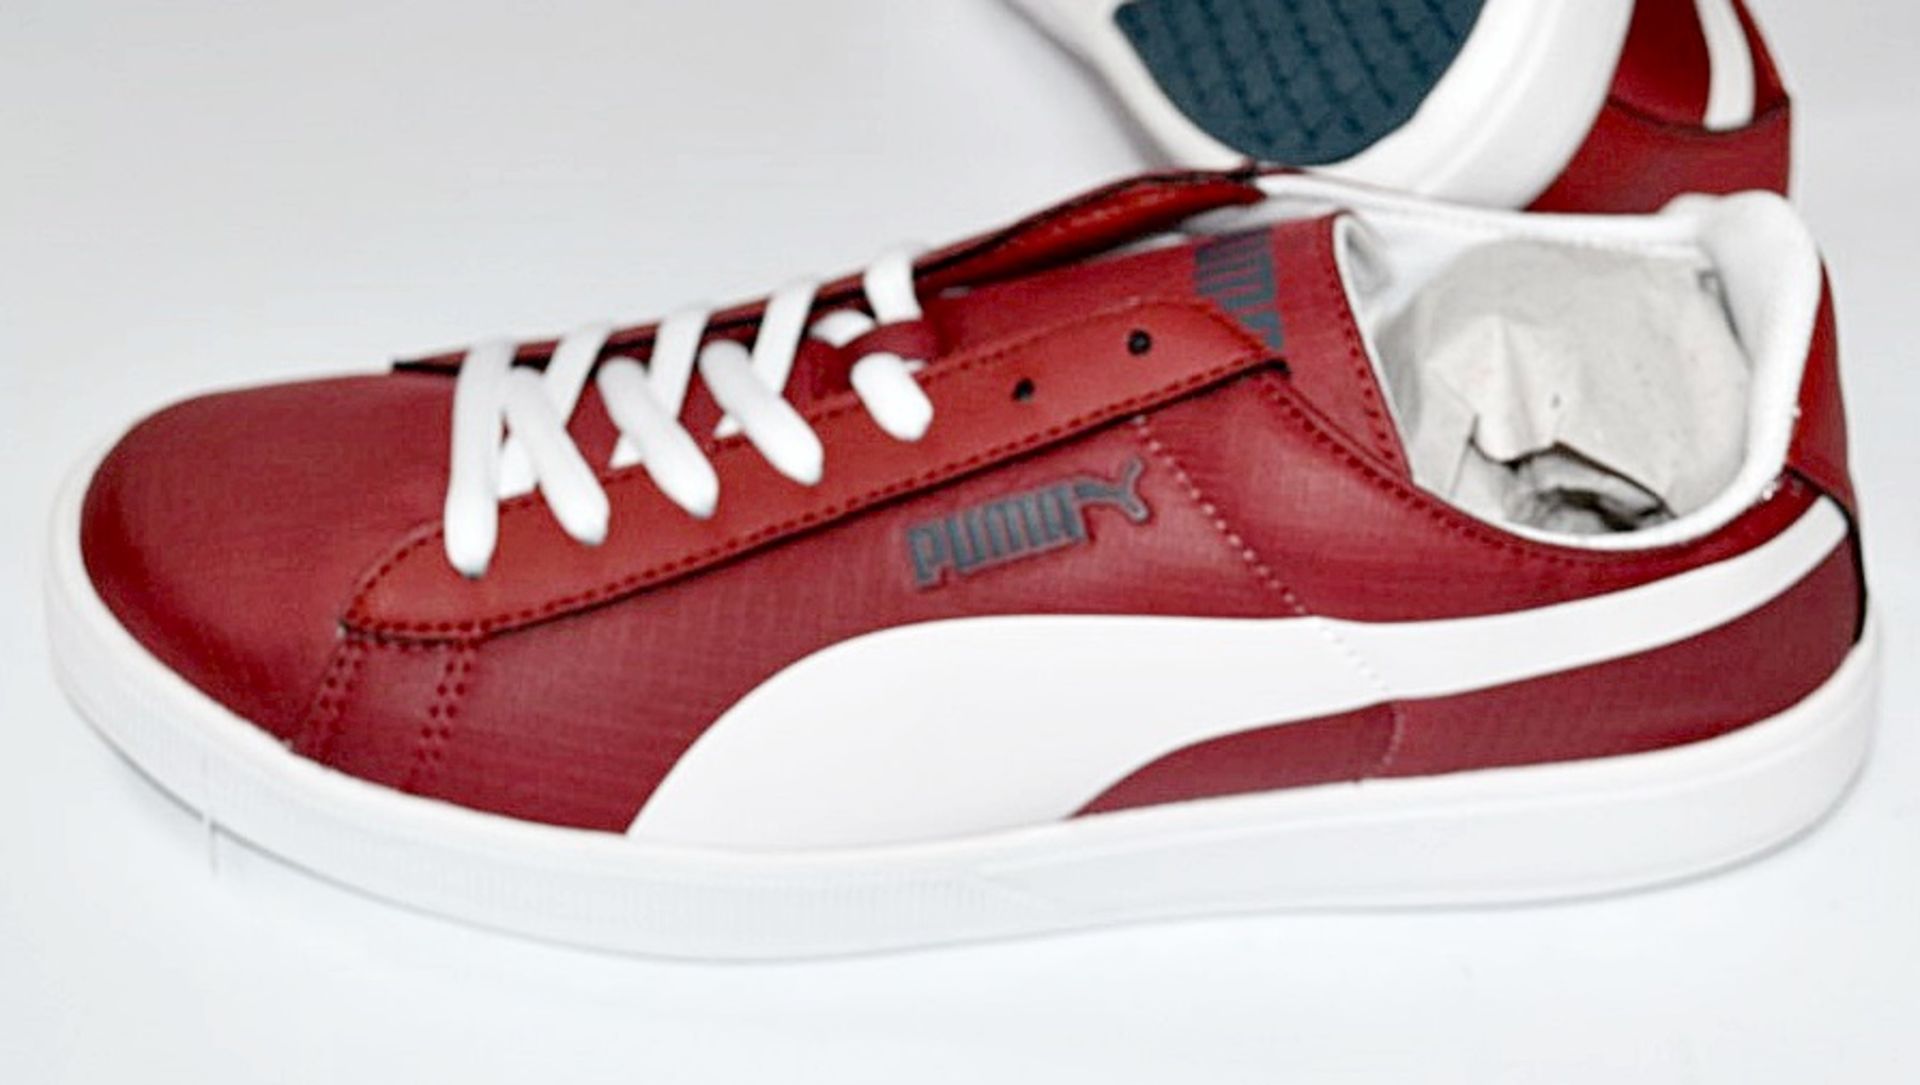 1 x Pair Of PUMA "Archive Lite Lo Ripstop" Trainers - Adult Size: UK 2 - CL155 - Colour: Red / White - Image 5 of 5